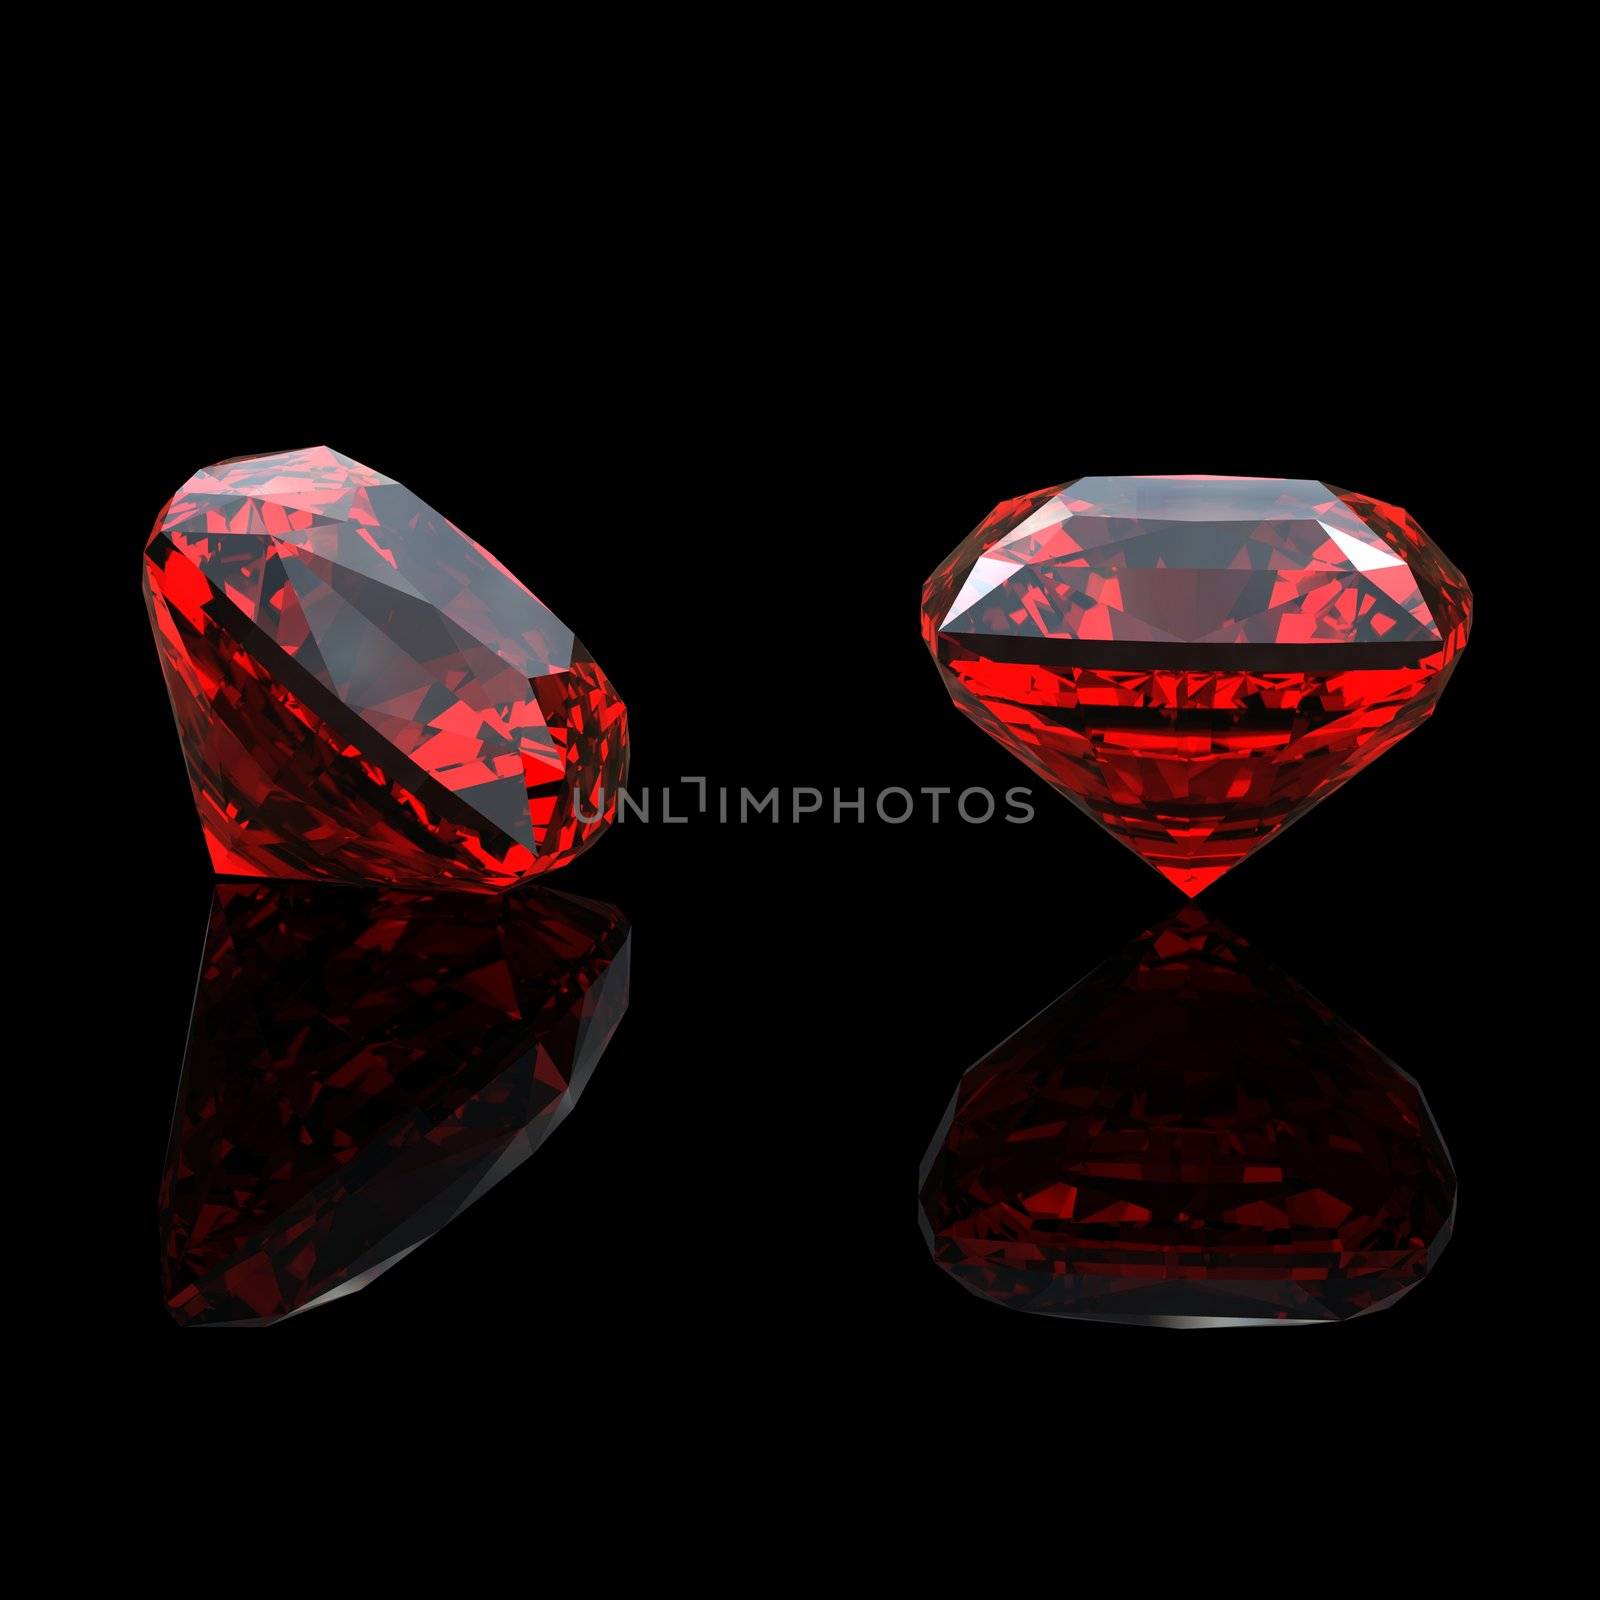 Jewelry gems shape of square on black background. Ruby